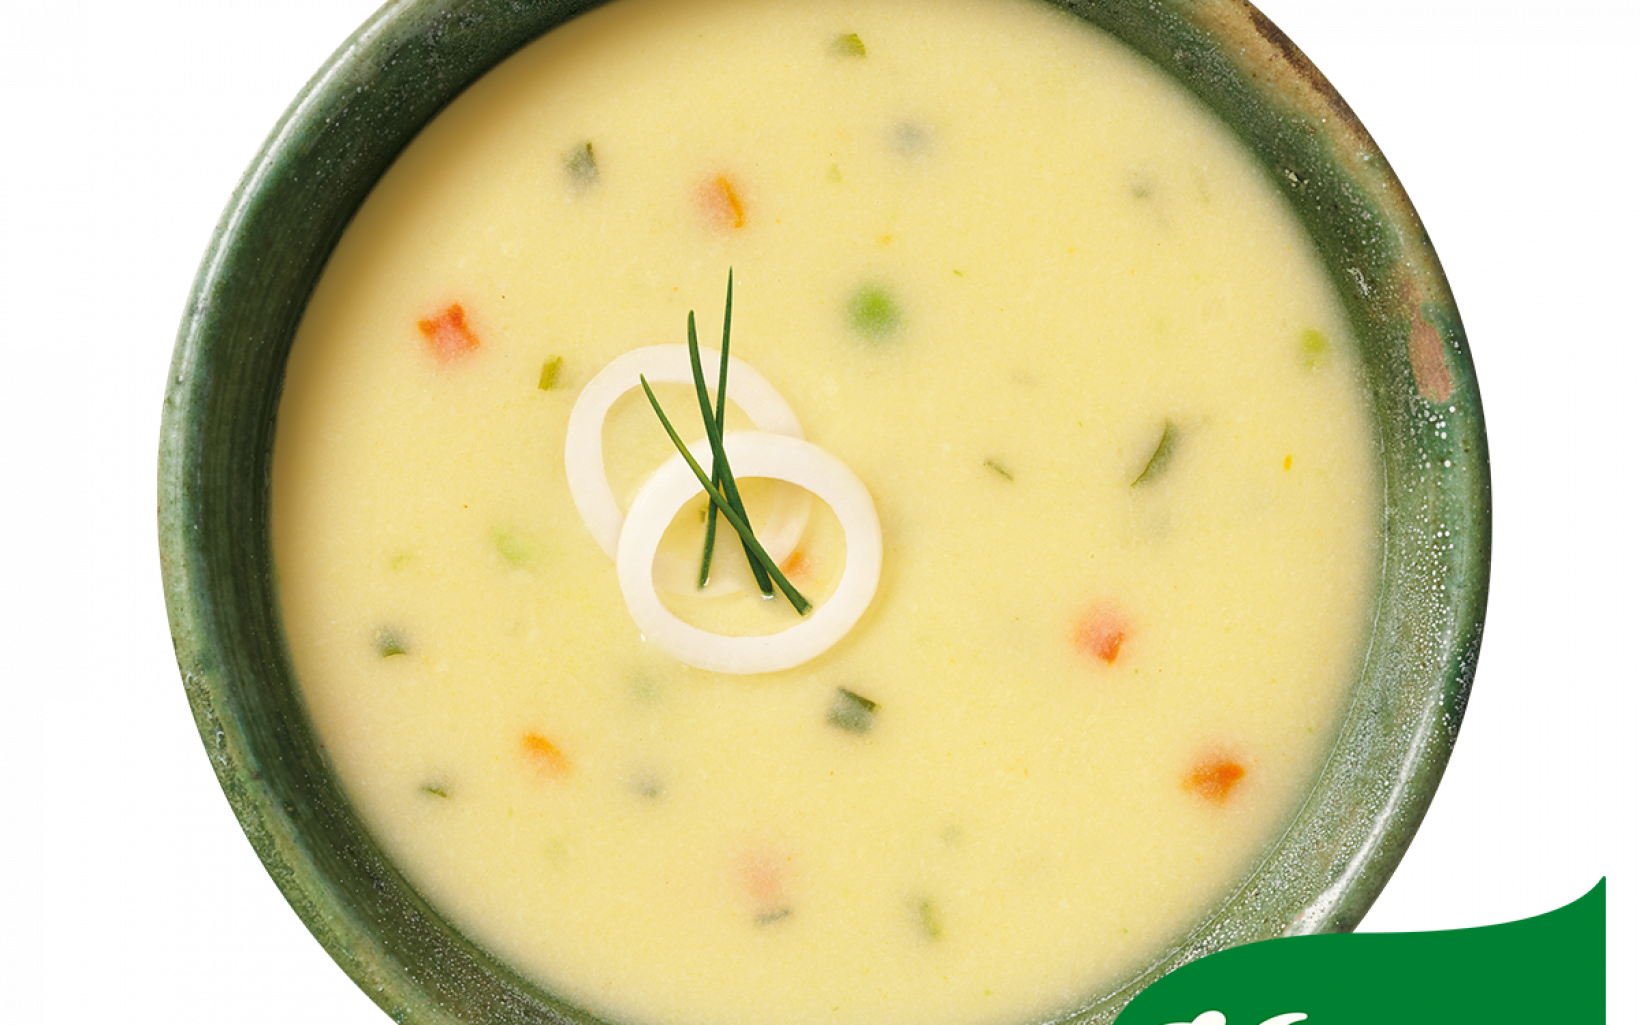 61556 Uk Knorr Classic Cream Of Vegetable Soup With Logo Supp Image 1200x1200px 20203pm